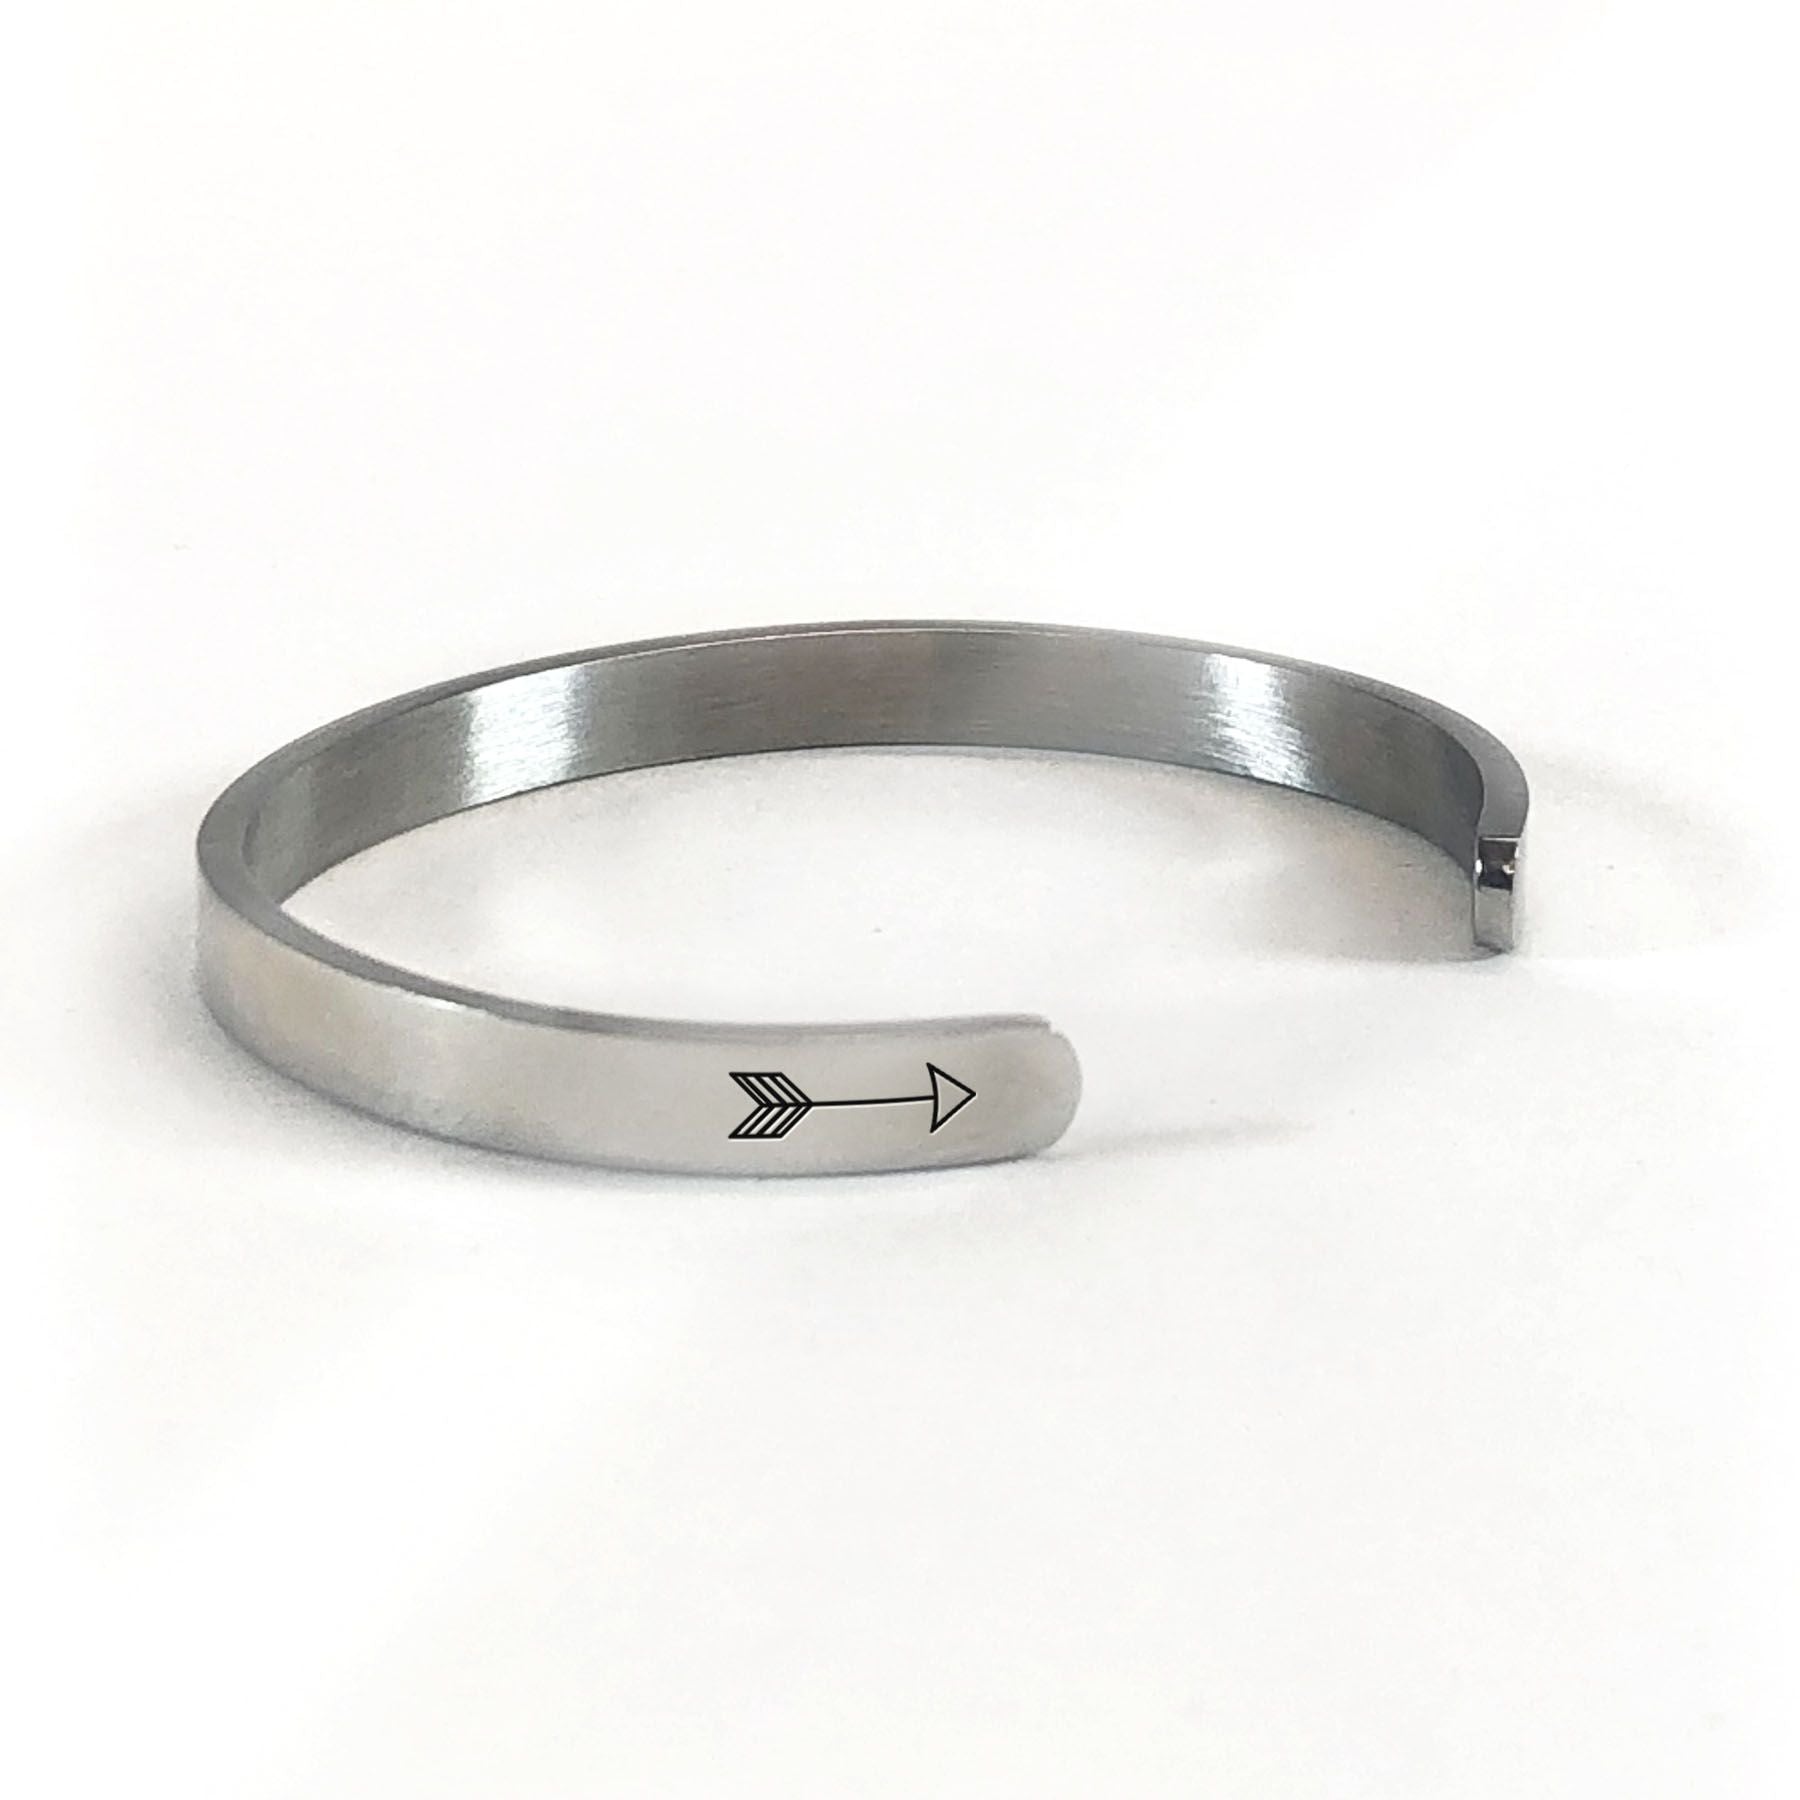 Kind heart, fierce mind, brave spirit bracelet with silver plating rotated to show arrows and cuff opening